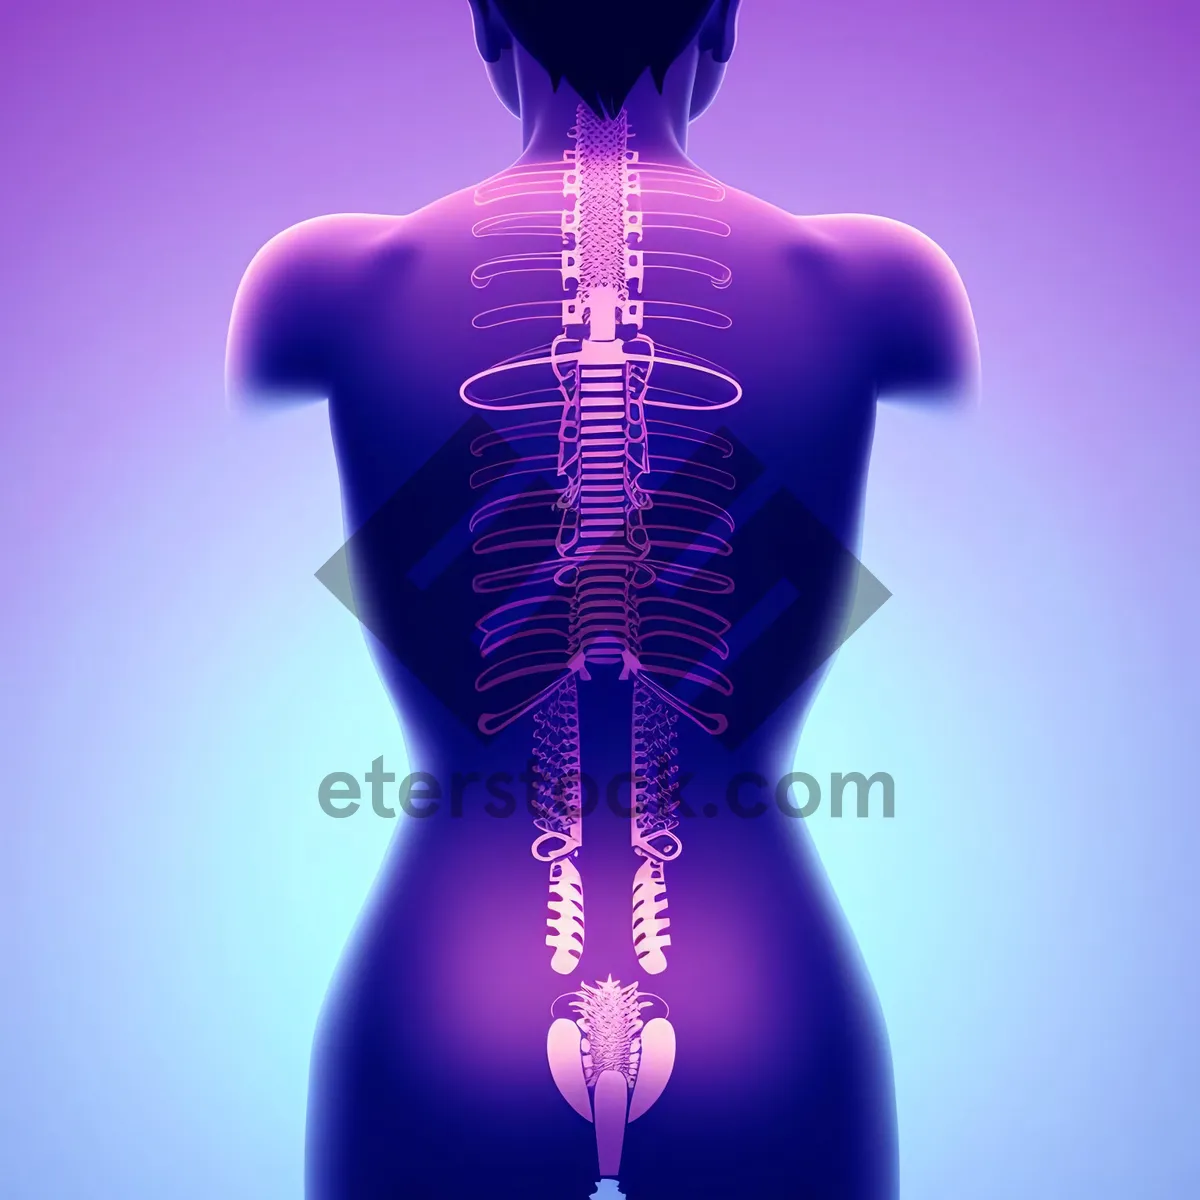 Picture of Human Skeletal System - Anatomical 3D X-Ray Image